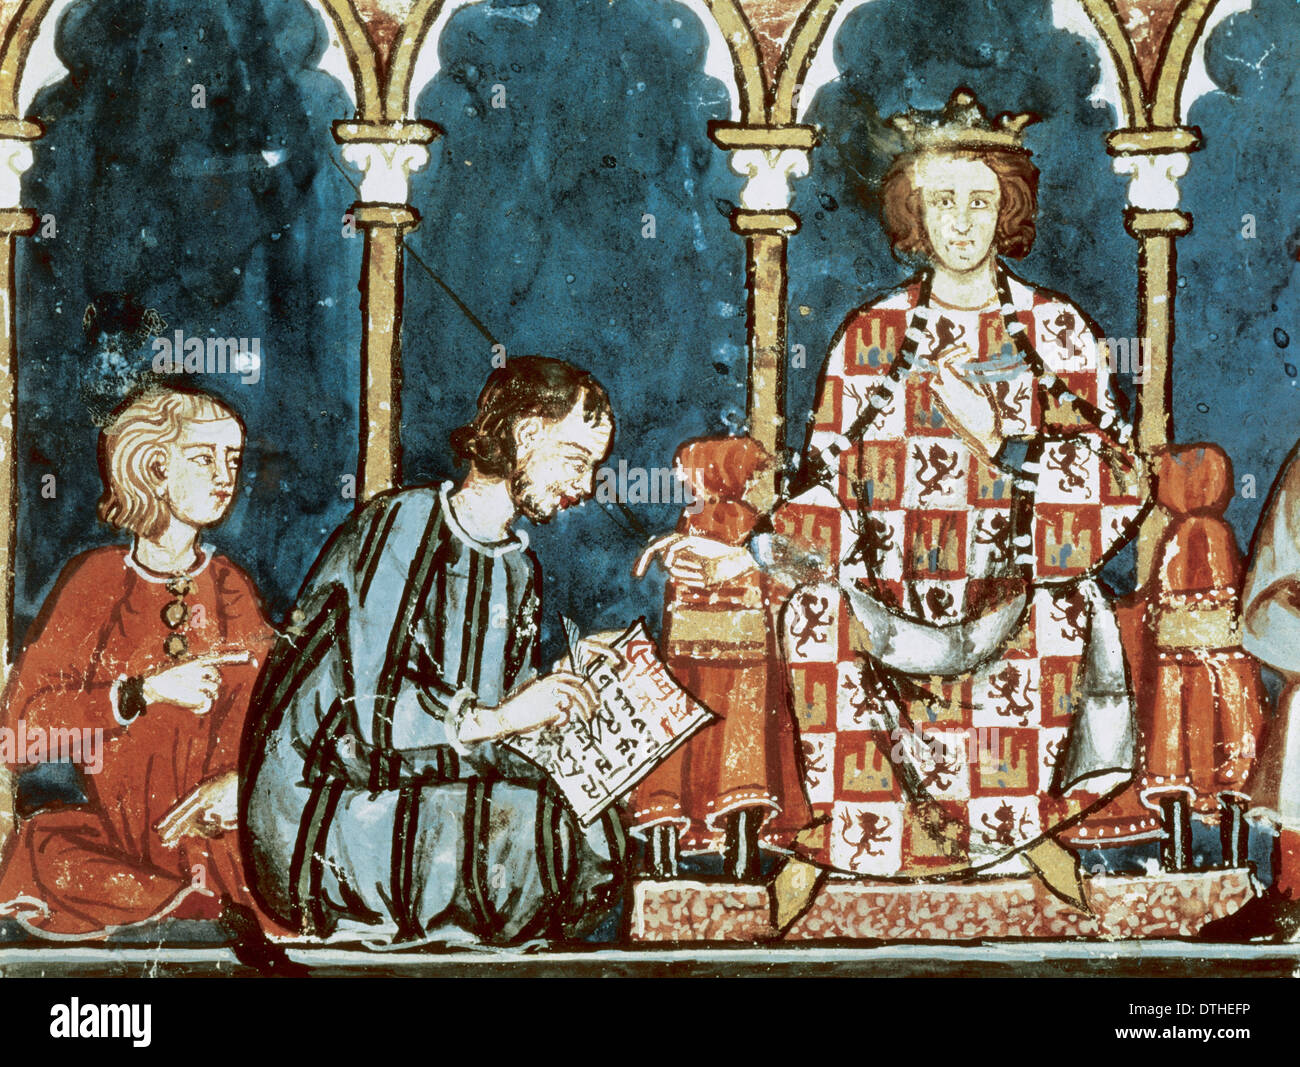 Alfonso X of Castile (1221-1284). King of Castile and Leon. Book of Games. Seville, 1282. Stock Photo